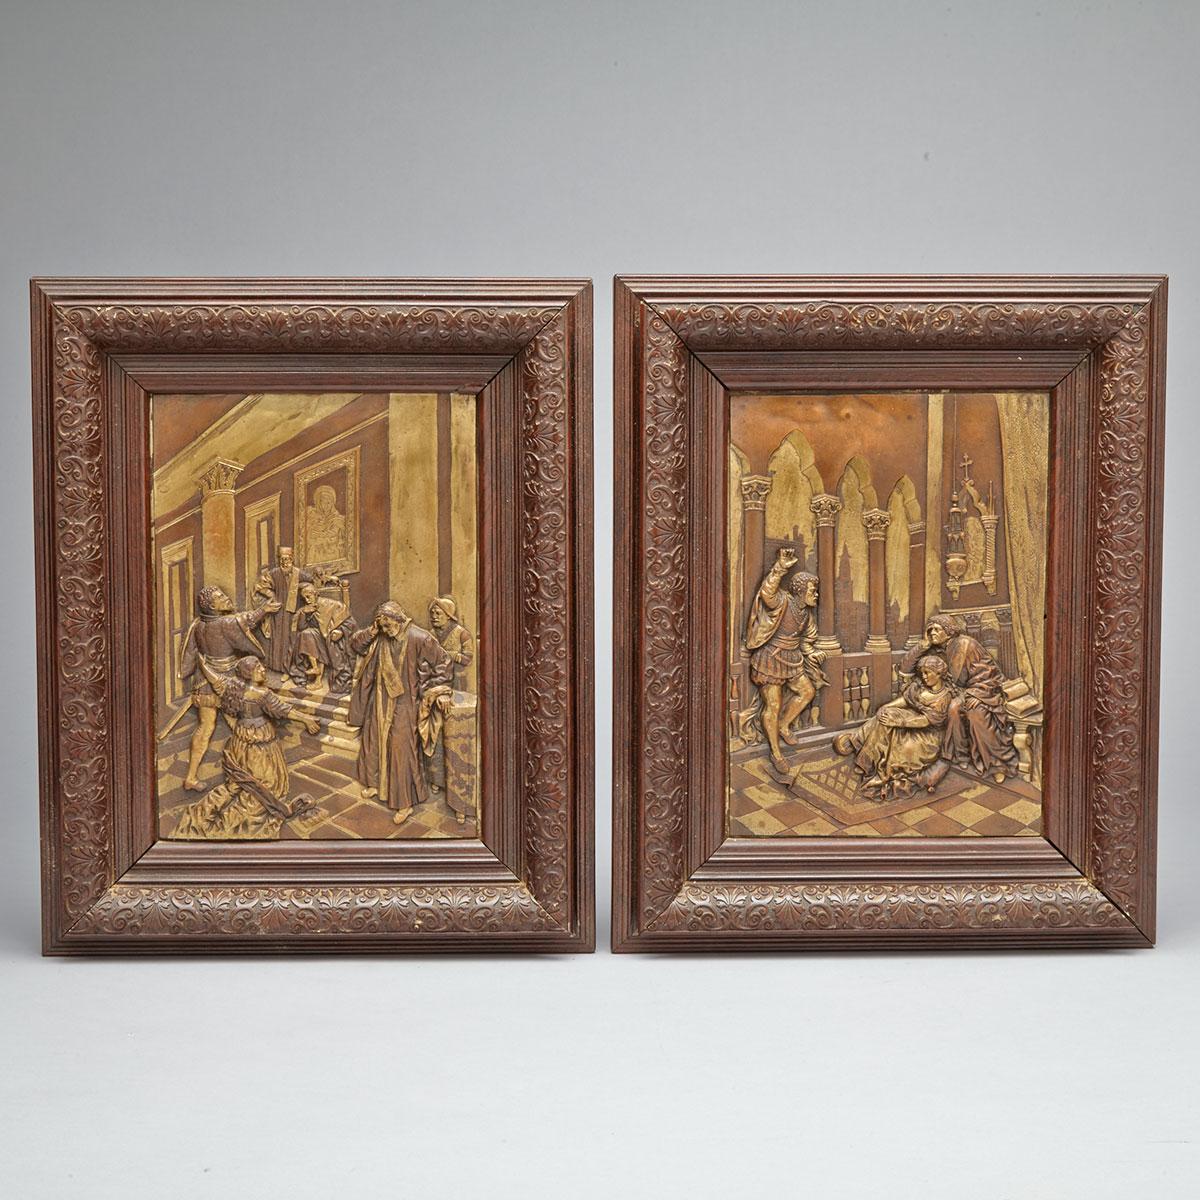 Pair of French Bakelite Framed Electrotype Panels, early 20th century